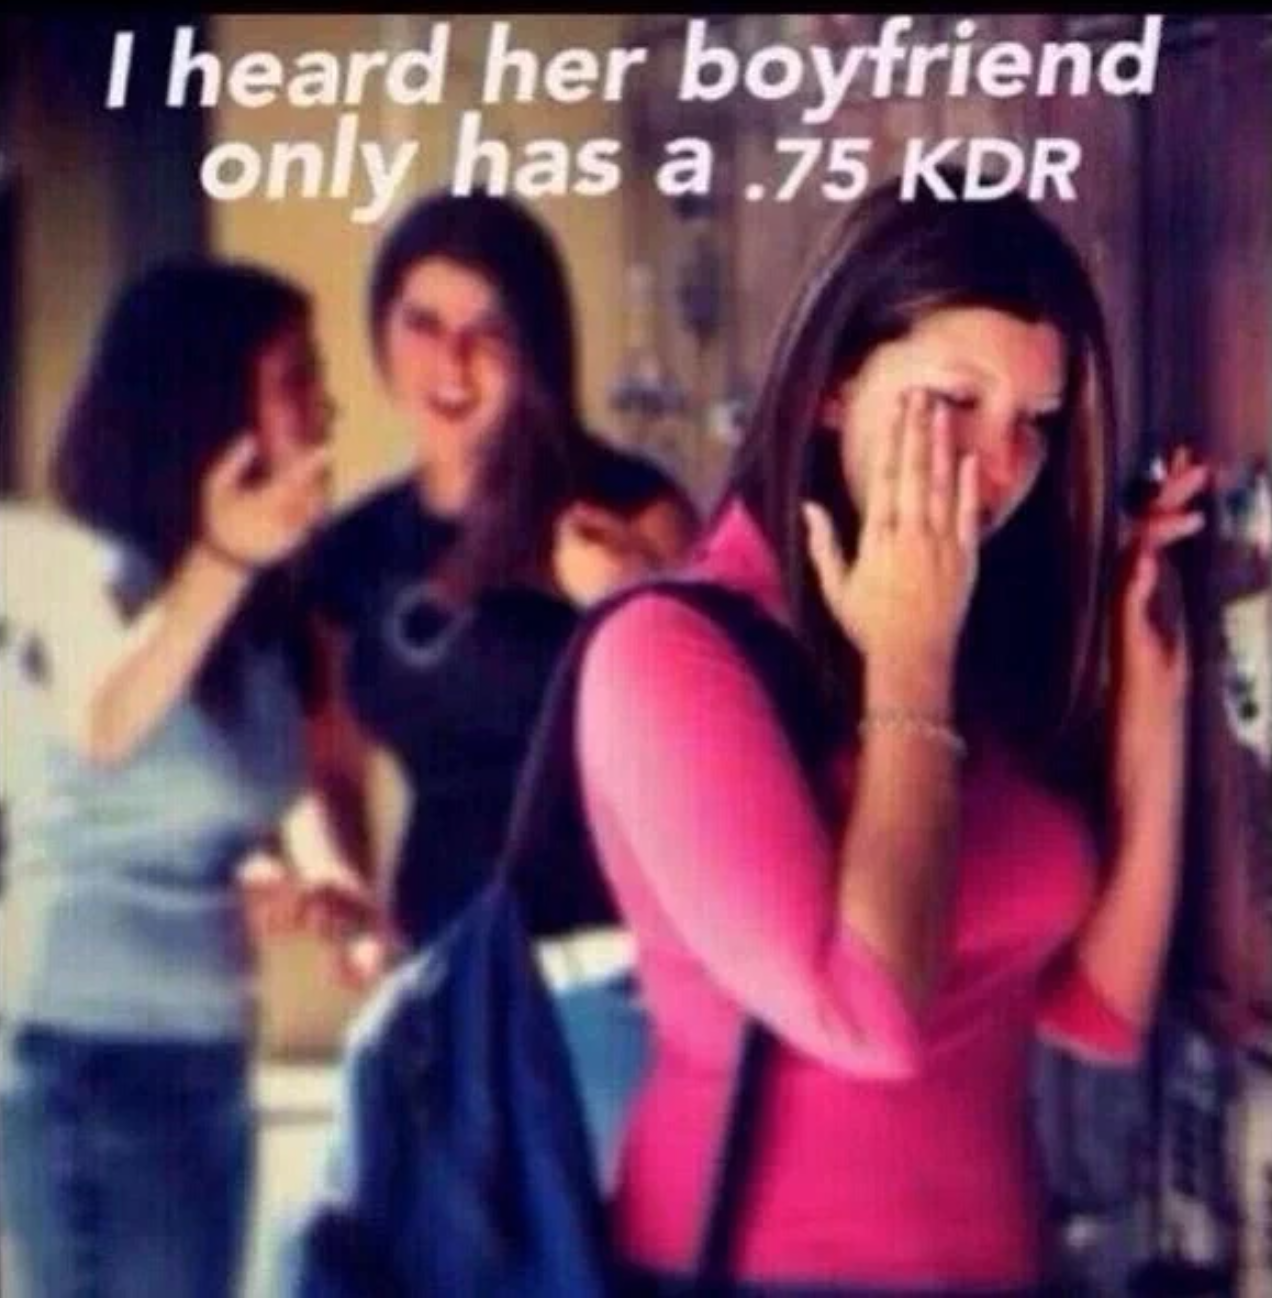 gaming memes and pics - making fun of others - I heard her boyfriend only has a .75 Kdr